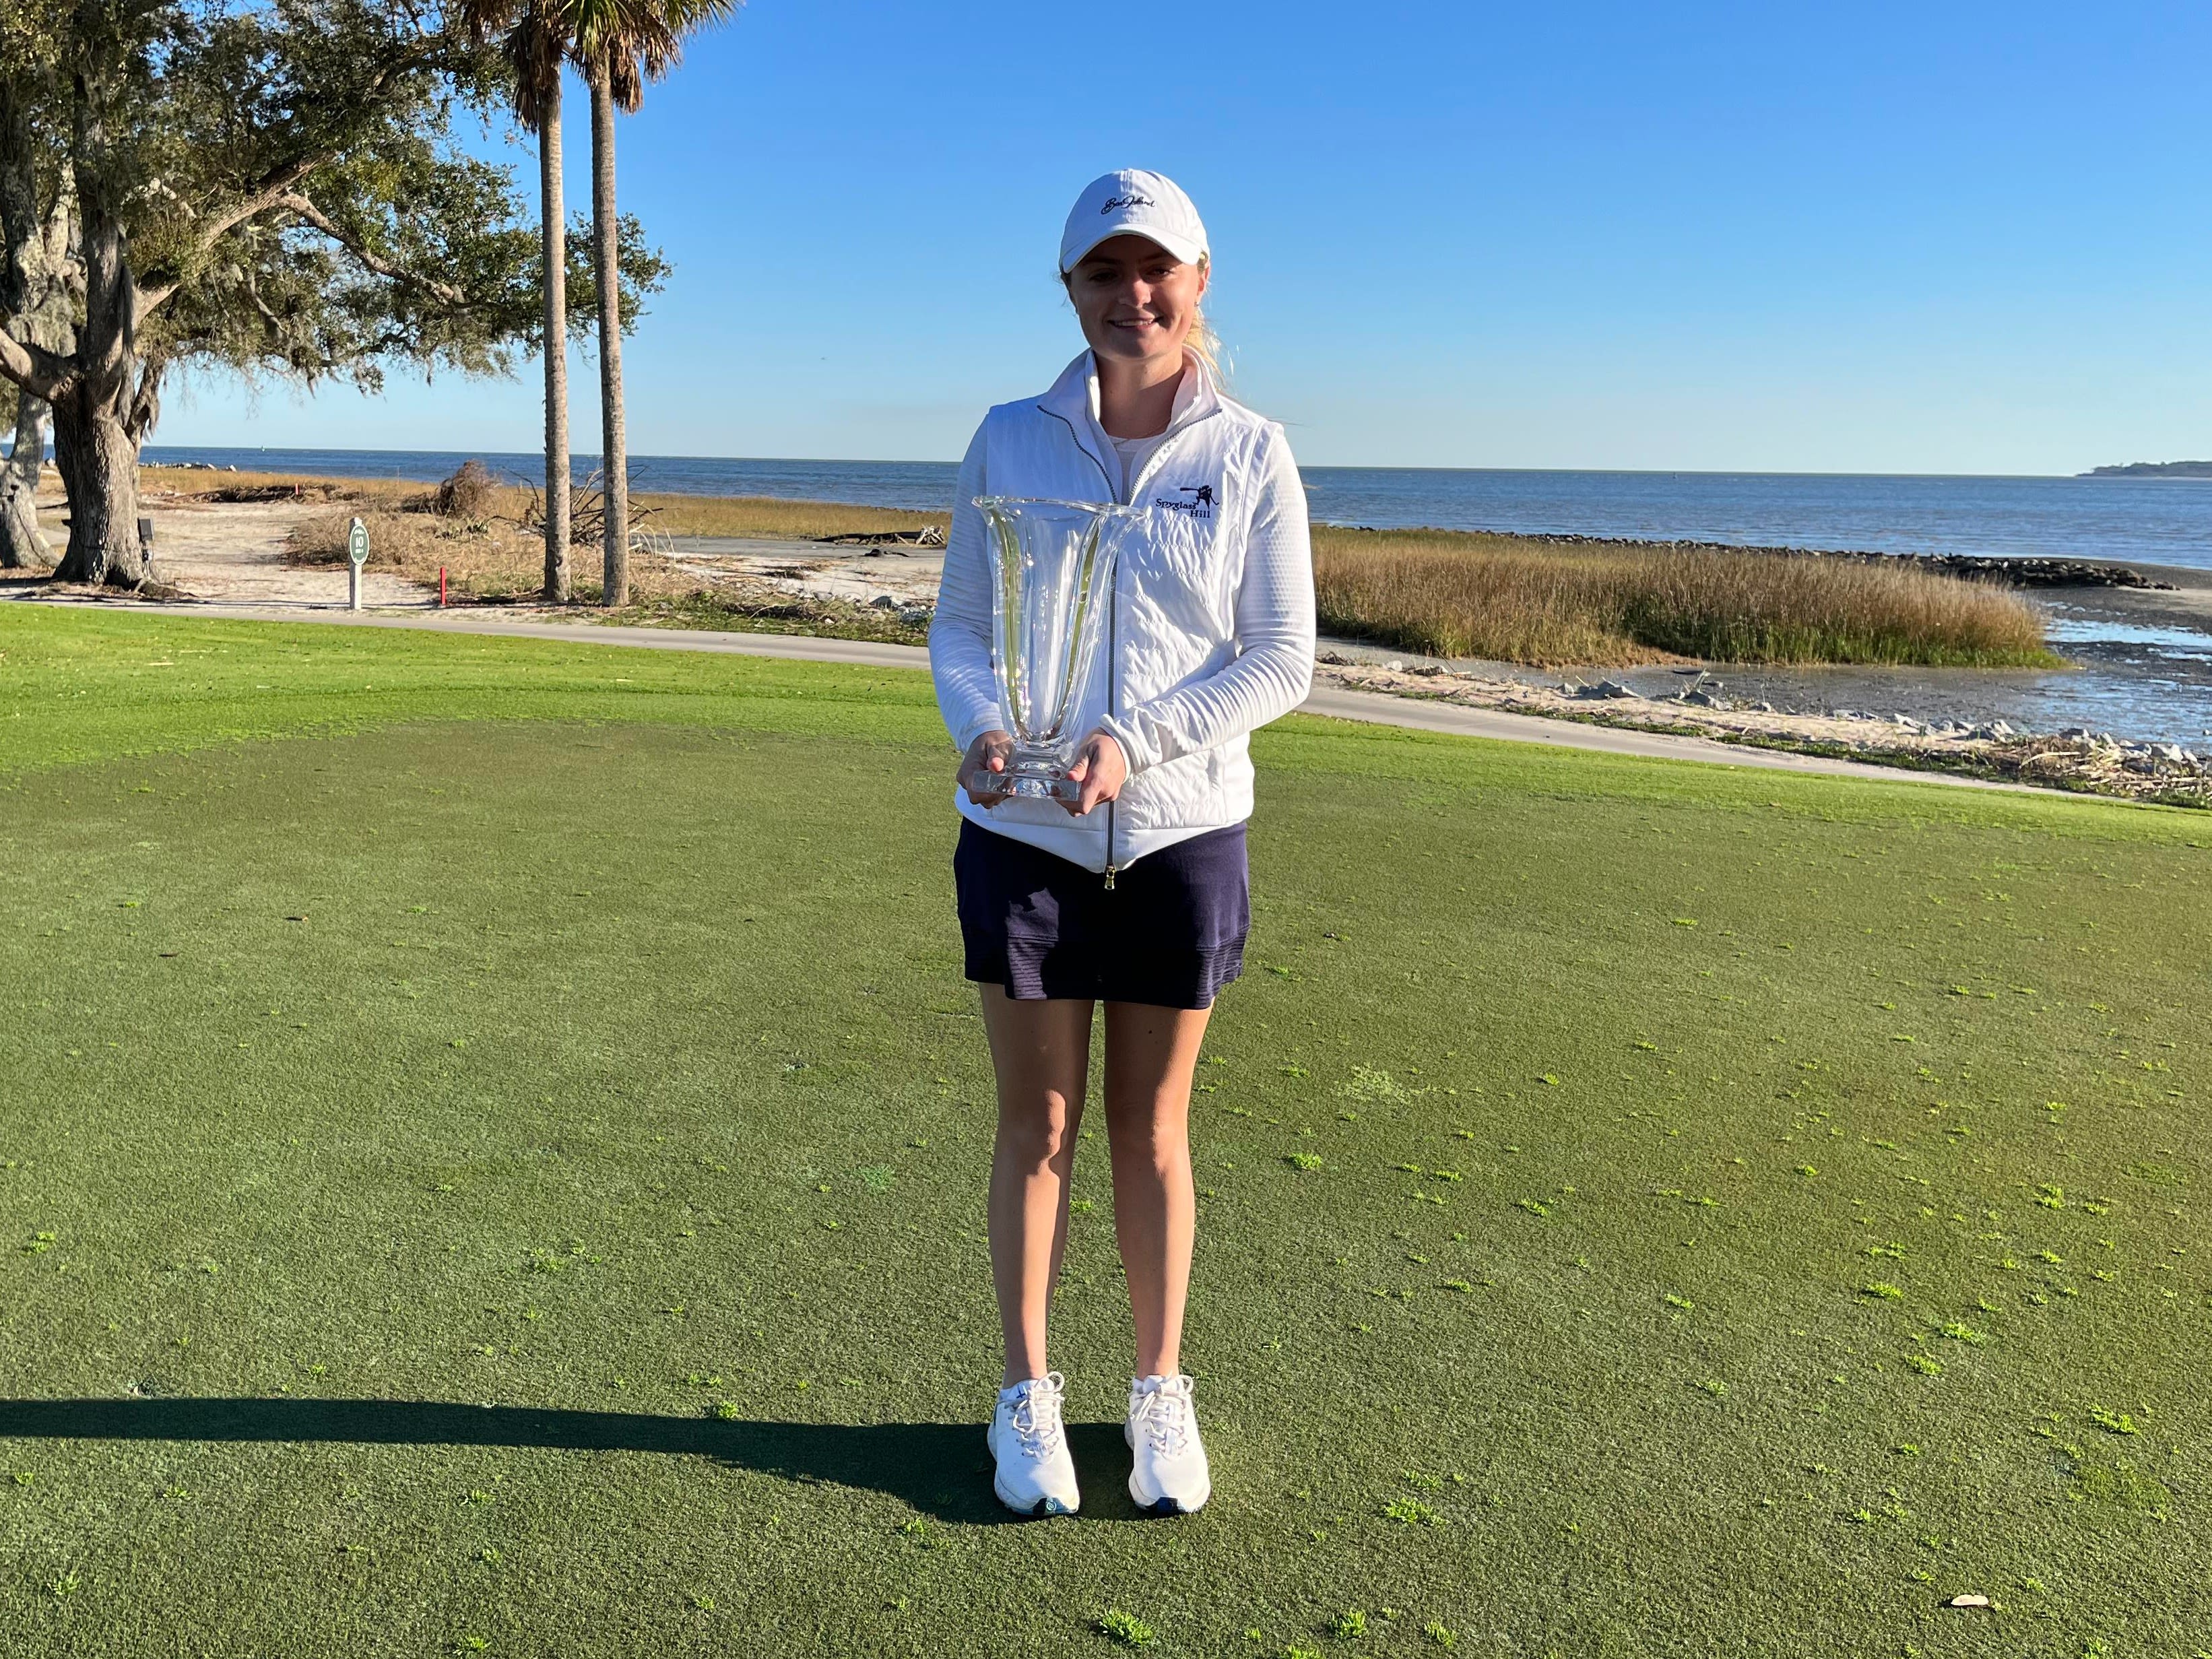 Women's Open Division Champion Catherine McEvoy of Innis Arden Golf Club in Greenwich, Connecticut.